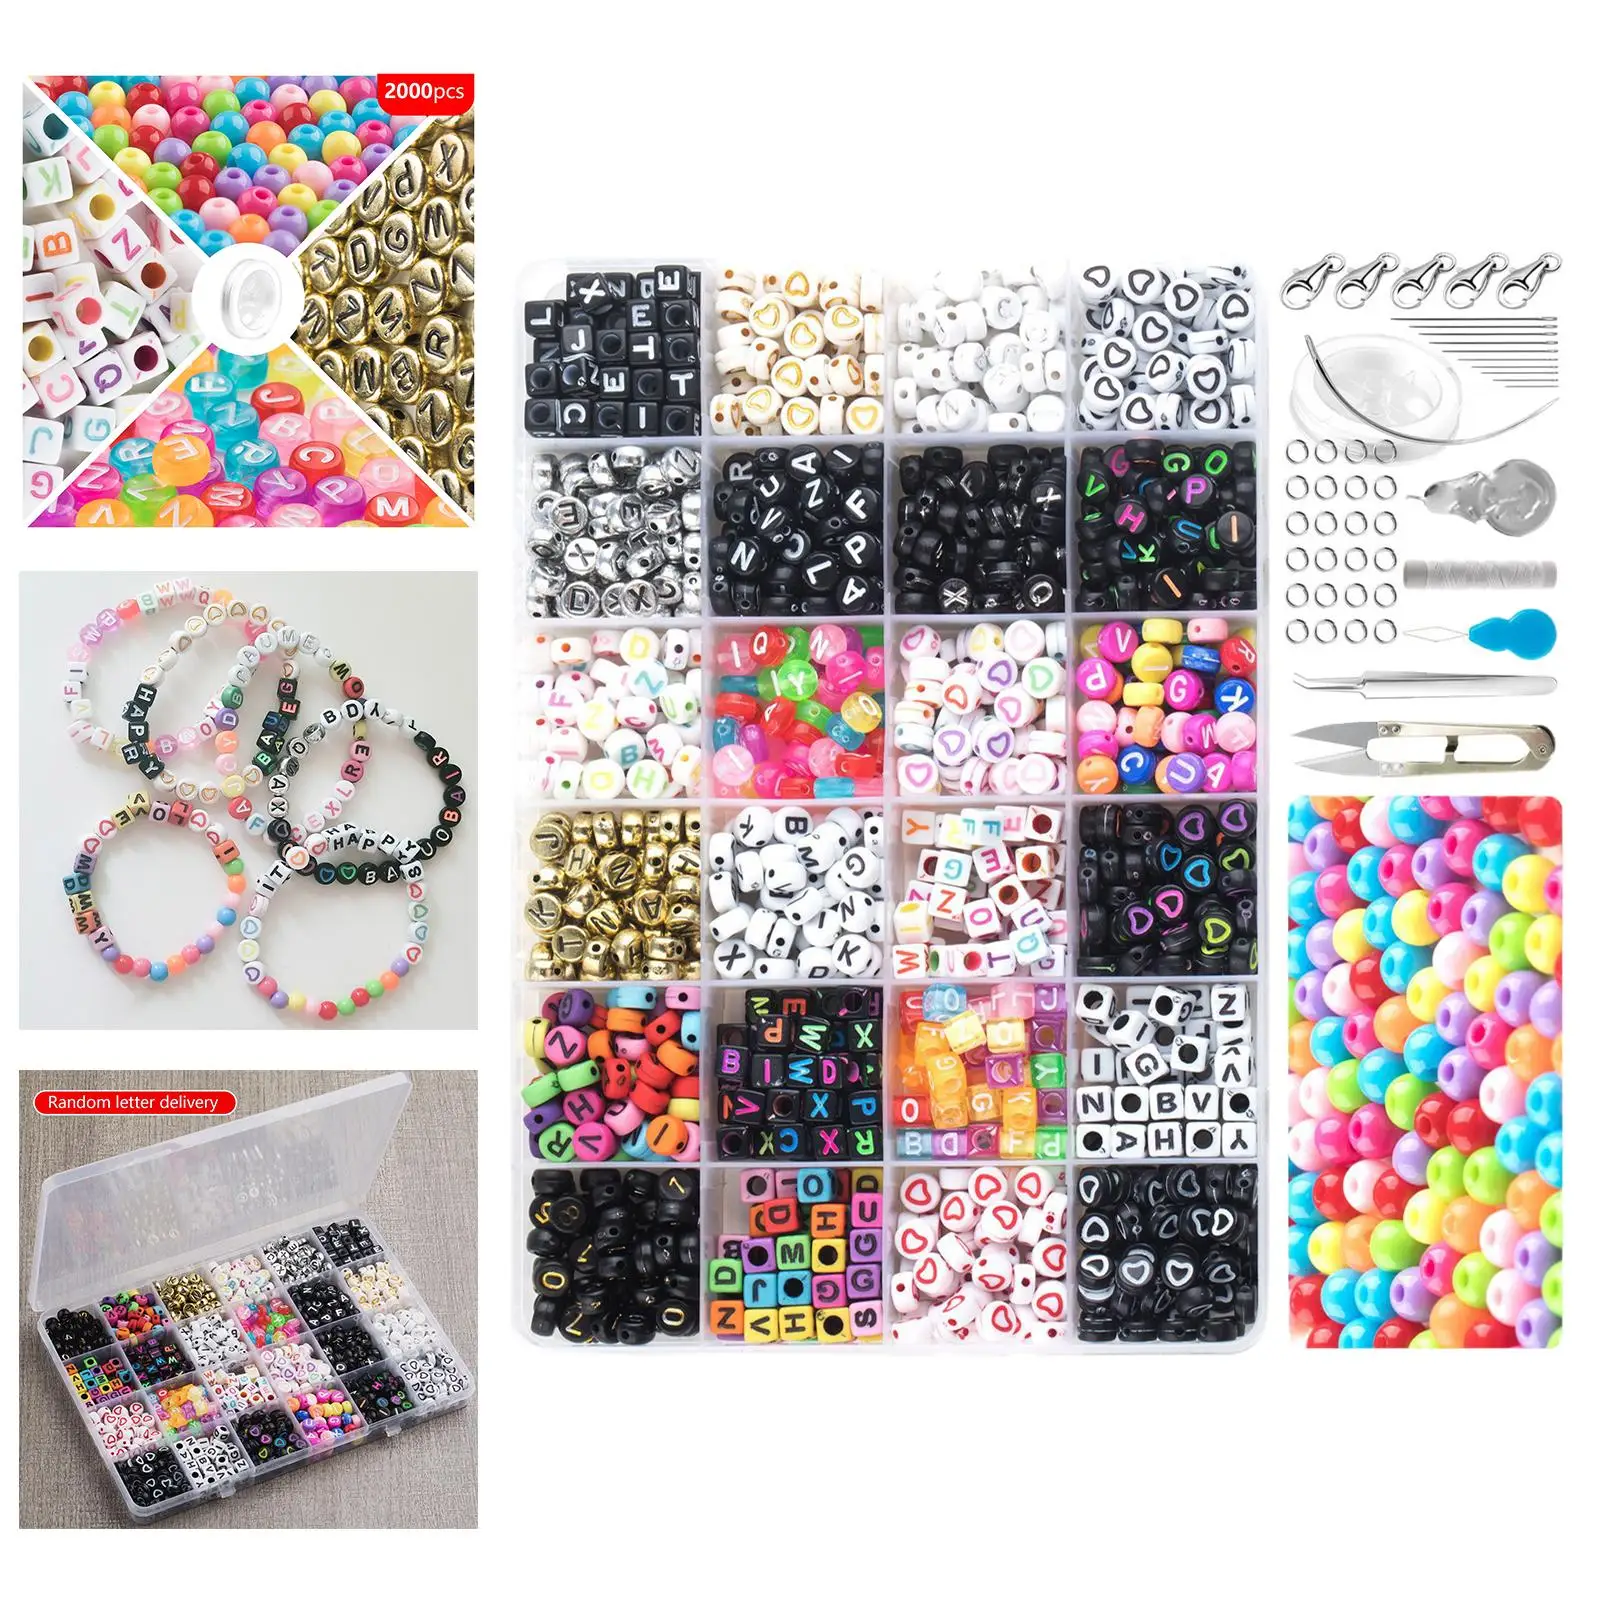 Alphabet Letter Beads 24 Grid Rainbow Craft Beads for Valentine`S Day Key Chains Graduation Colorful Crafting DIY Necklaces